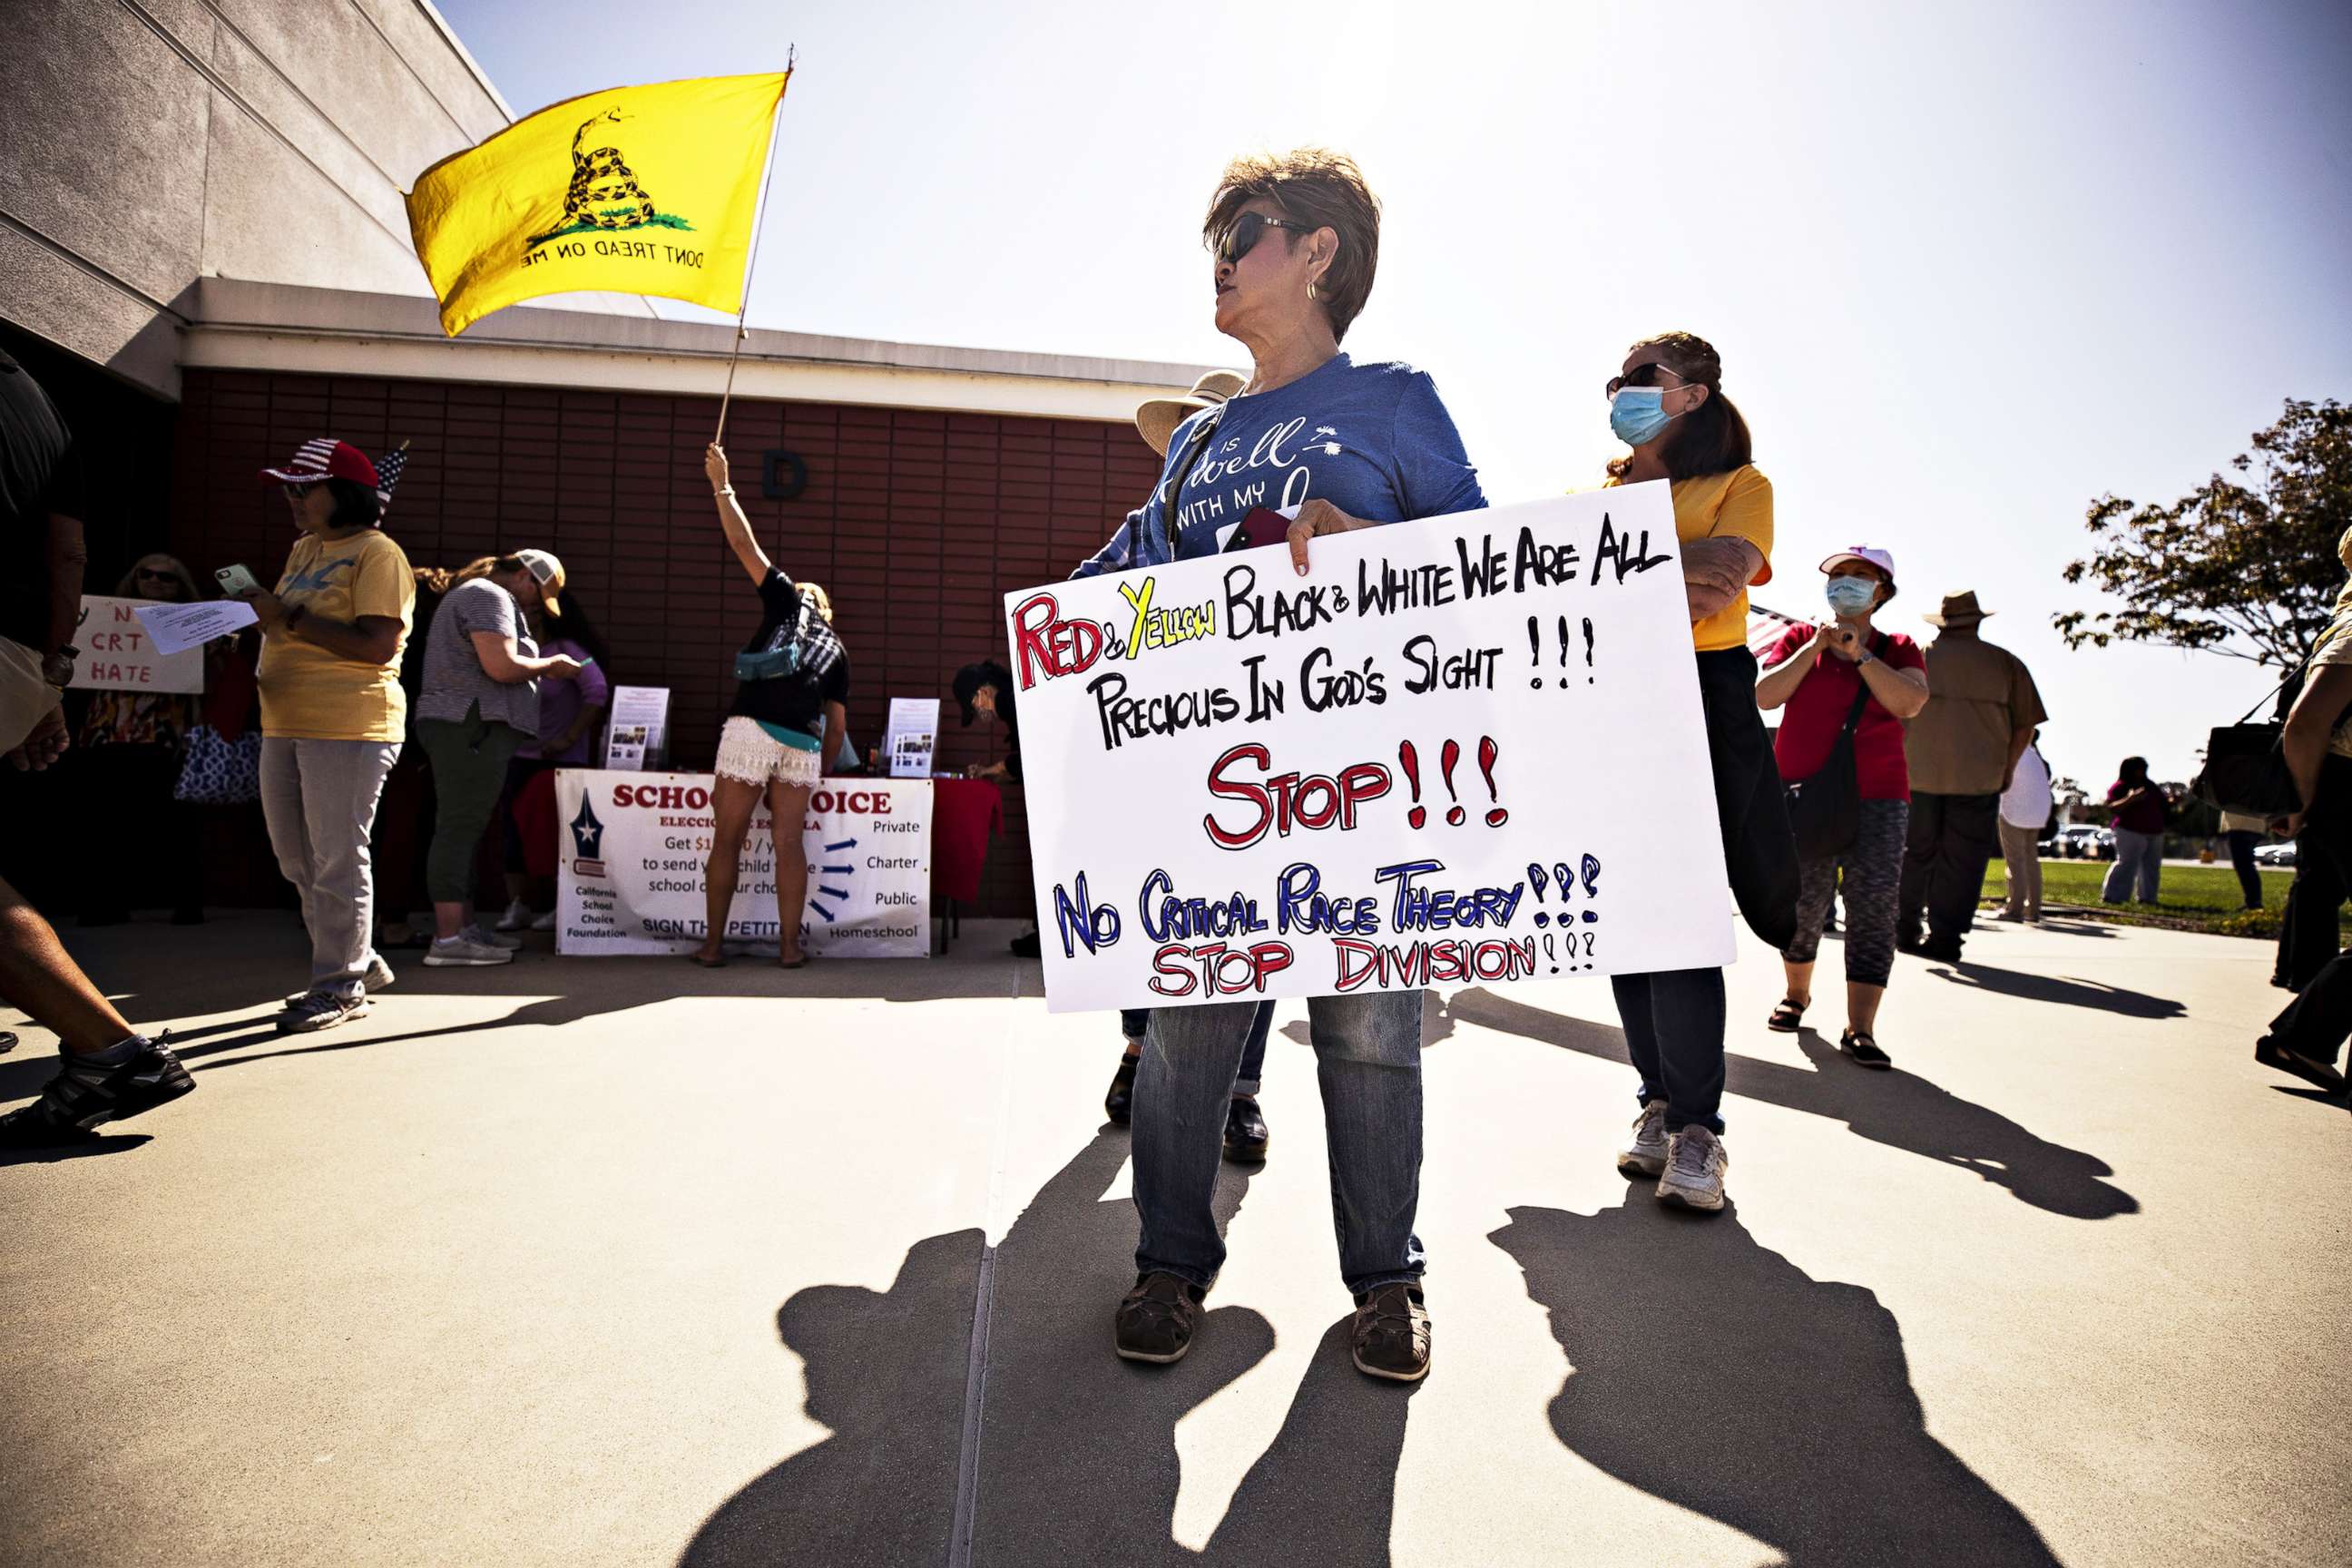 PHOTO: A protester holds a sign reading 'Red and Yellow Black and White We are all Precious in God's Sight! Stop! No Critical Race Theory! Stop Division!' at the Los Alamitos Unified School District building in Los Alamitos, Calif., May 11, 2021.